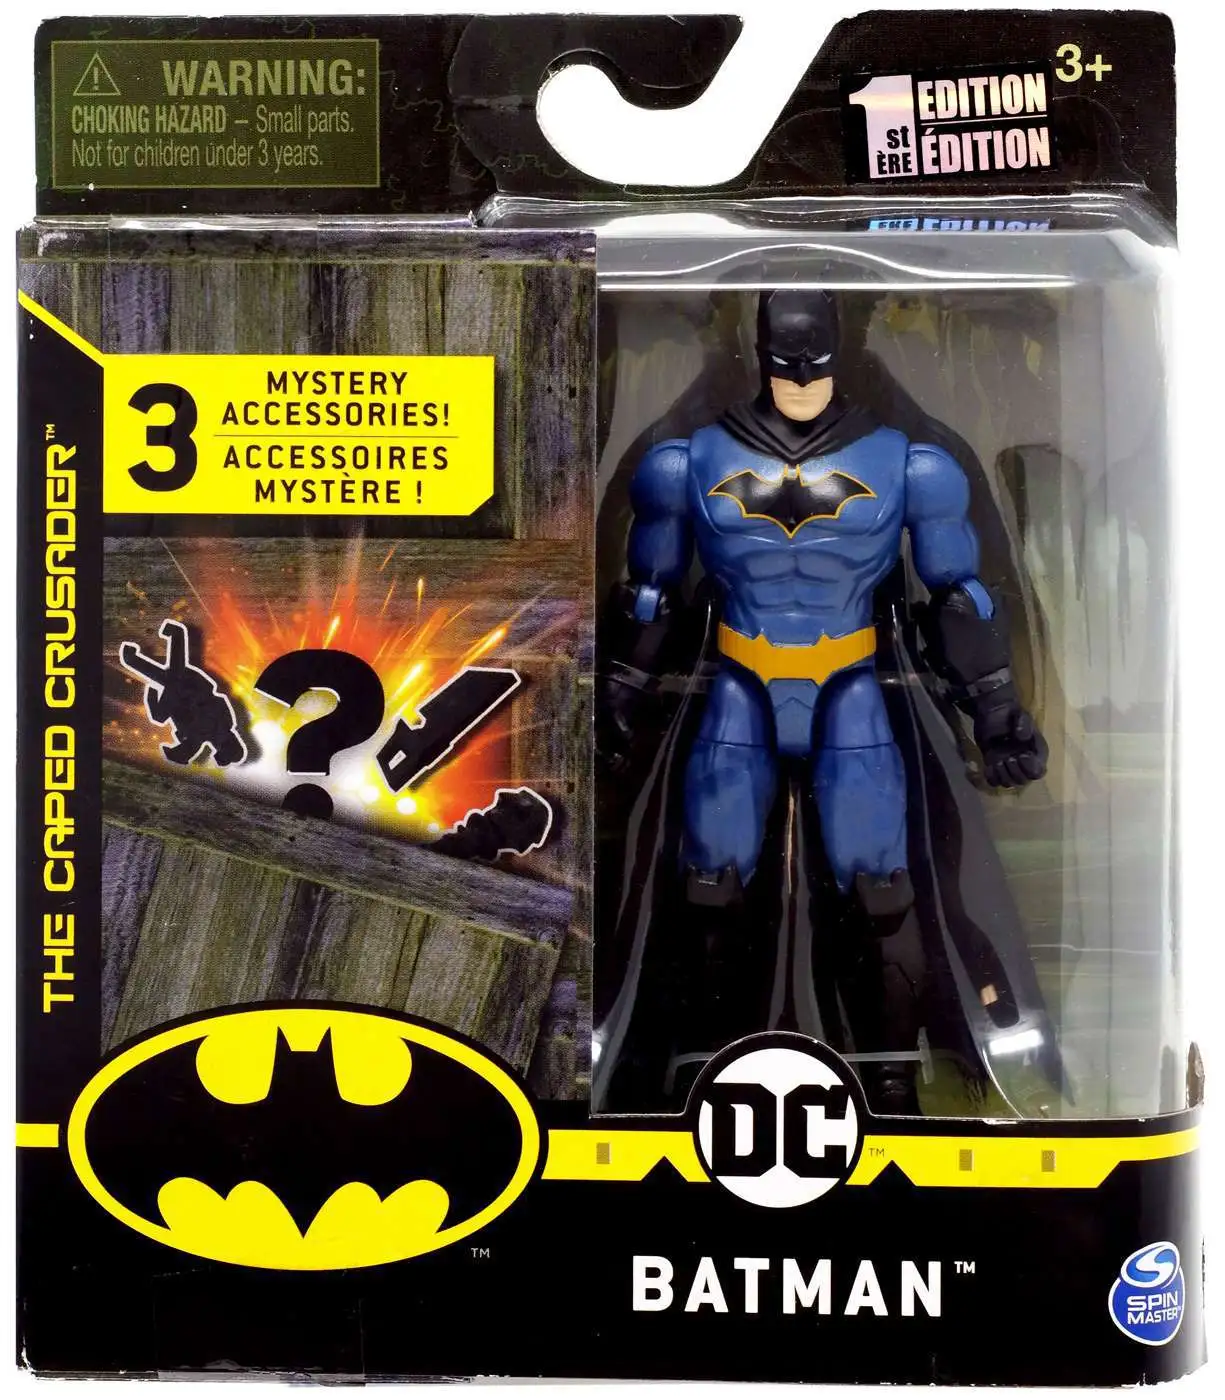 DC Gold Batman Chase Spin Master Action Figure The Caped Crusader 1st Edition for sale online 